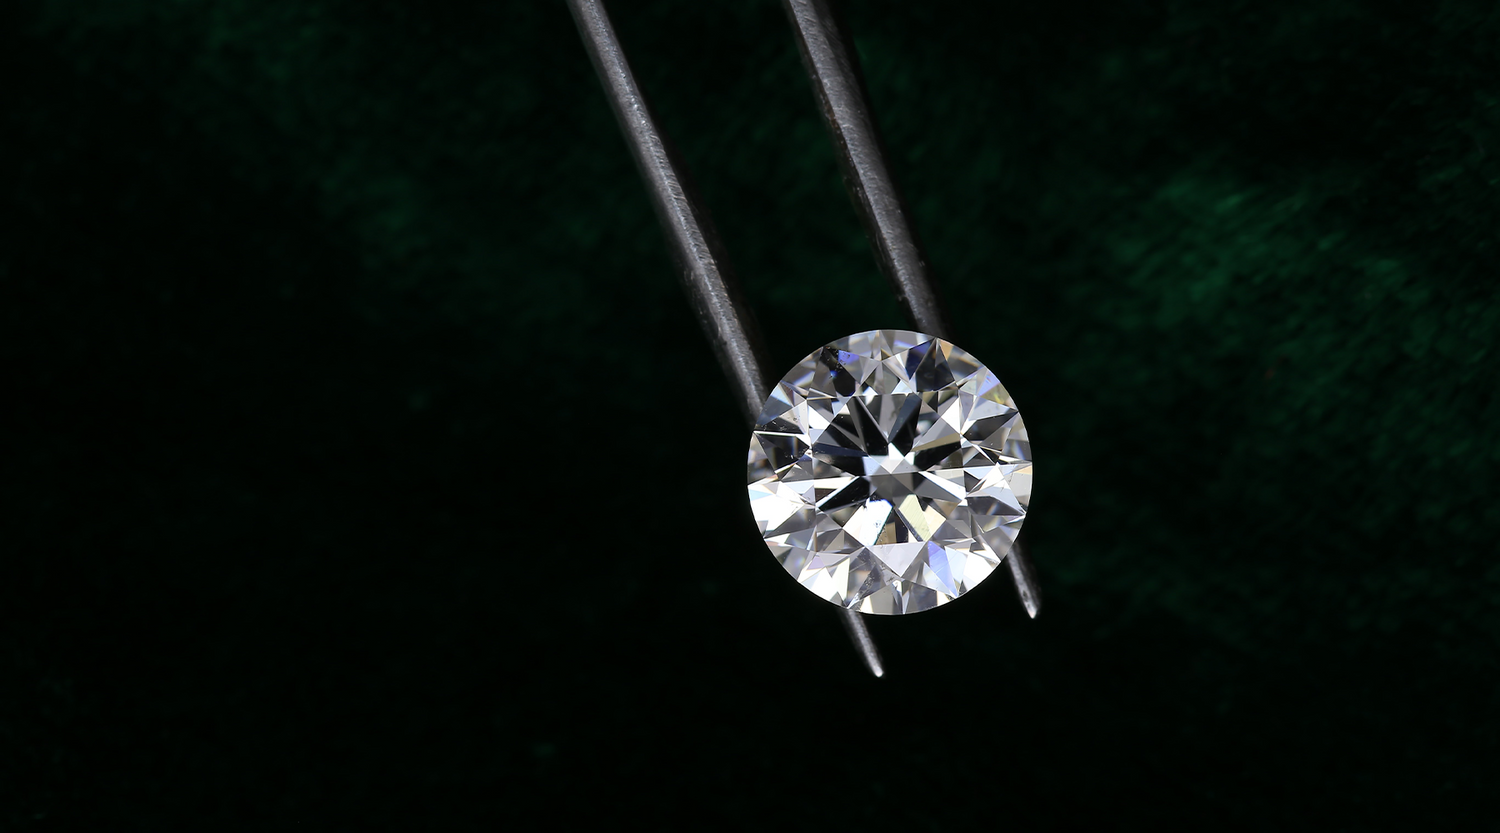 We stock a large variety of Lab Grown Diamonds at our Auckland Showroom